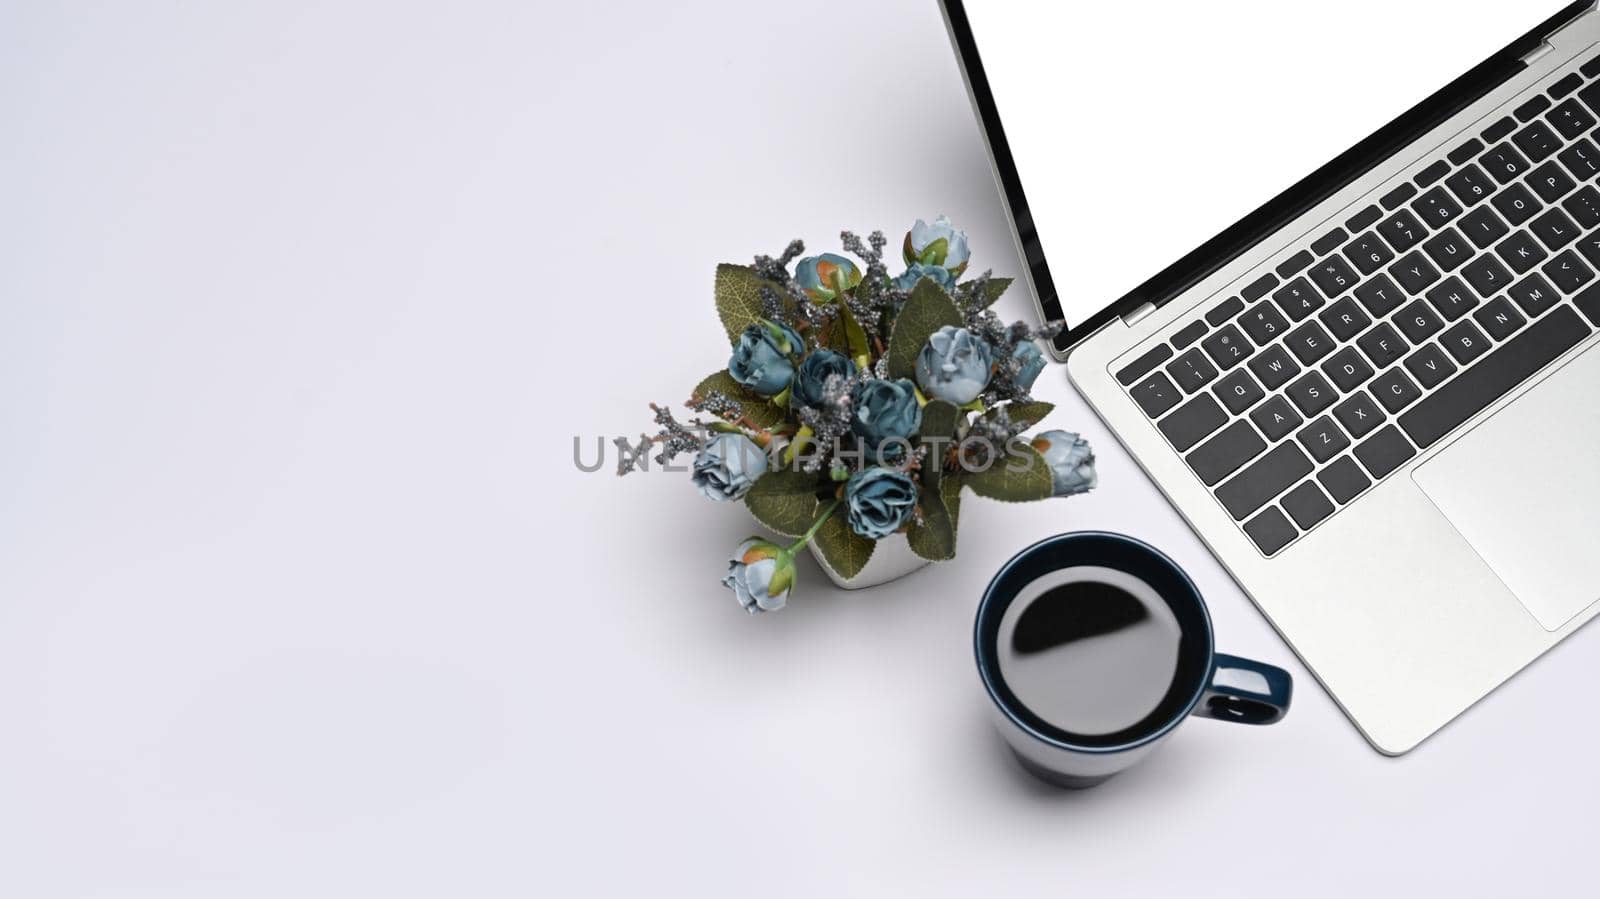 Mockup laptop computer with empty display, coffee cup and flower pot on white background. by prathanchorruangsak